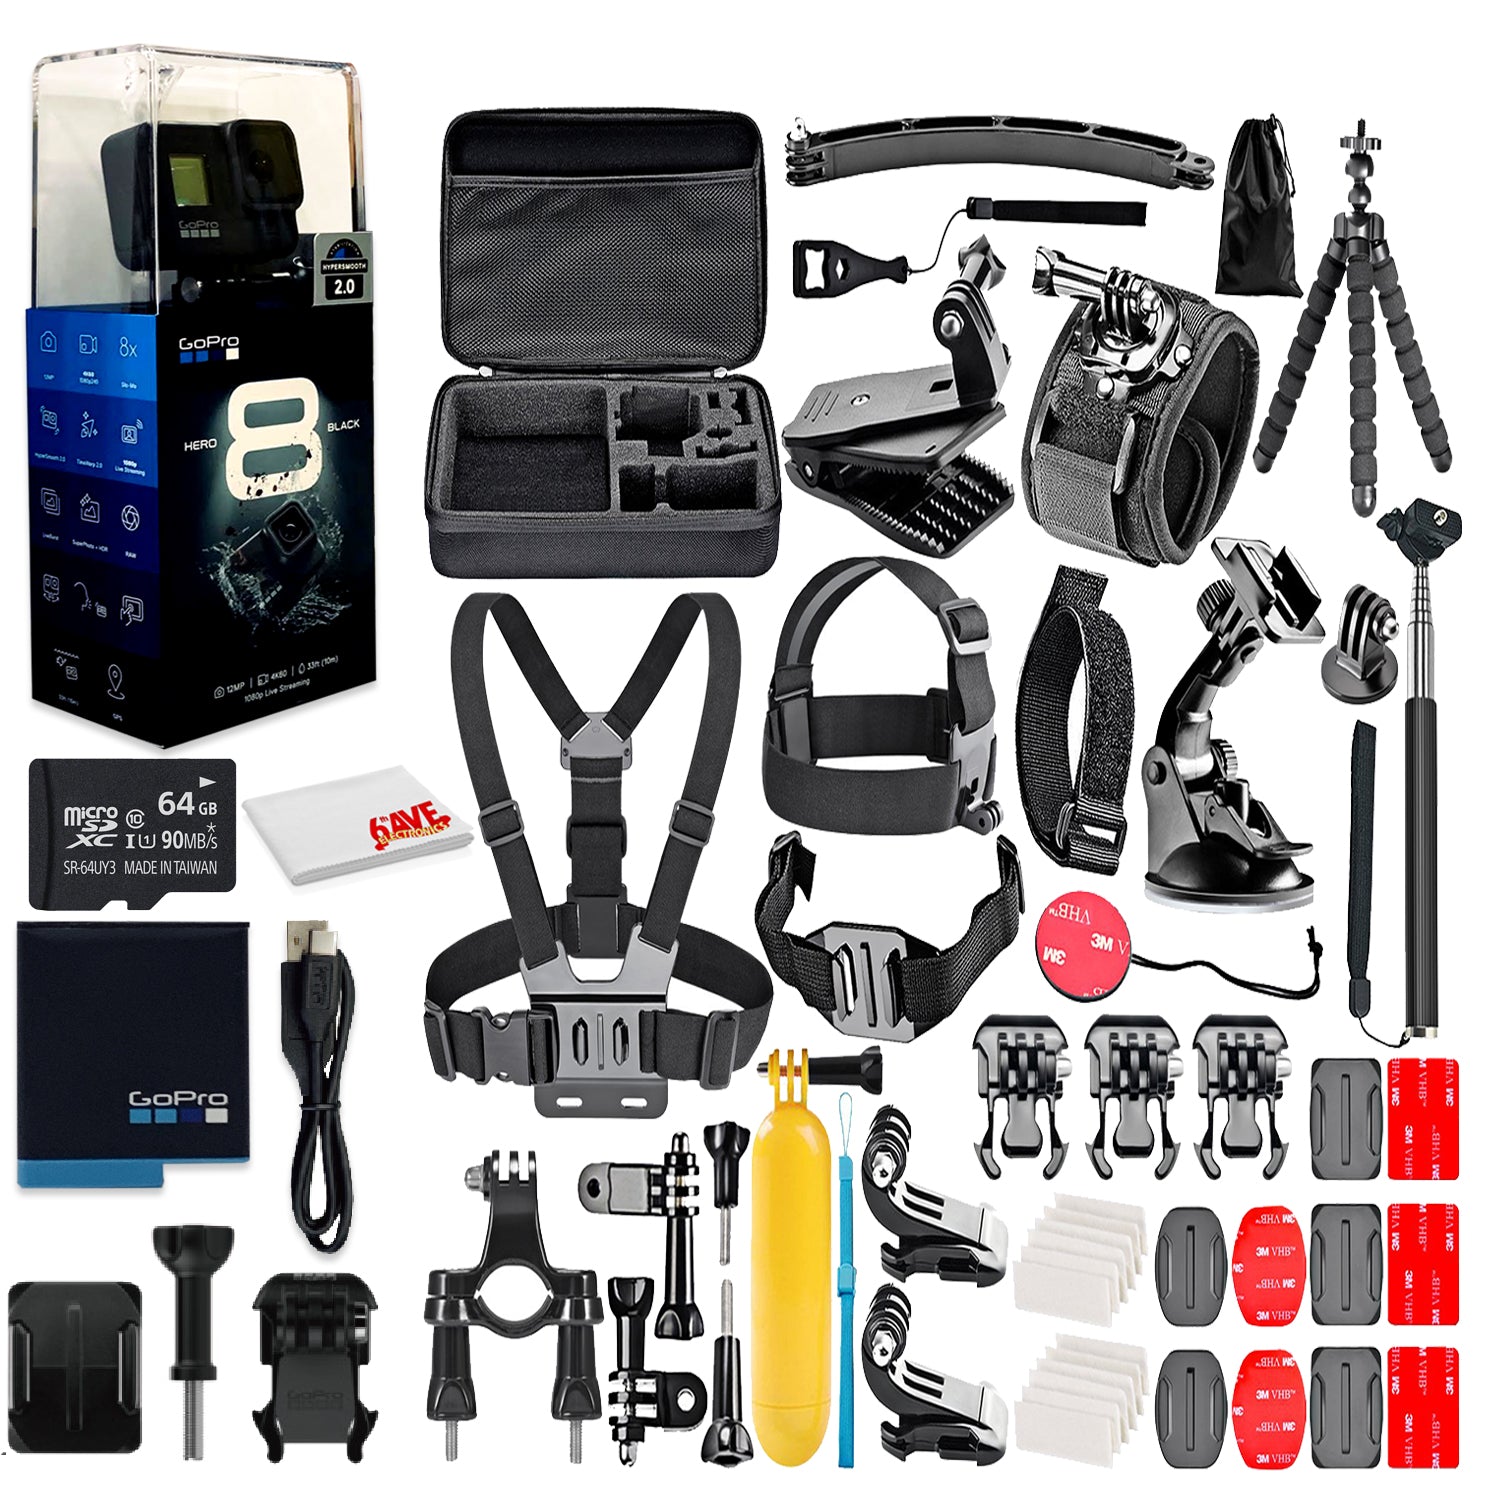 GoPro HERO8 Black Digital Action Camera - With 64GB Memory Card and 50 Piece Accessory Kit - Fully Loaded Bundle